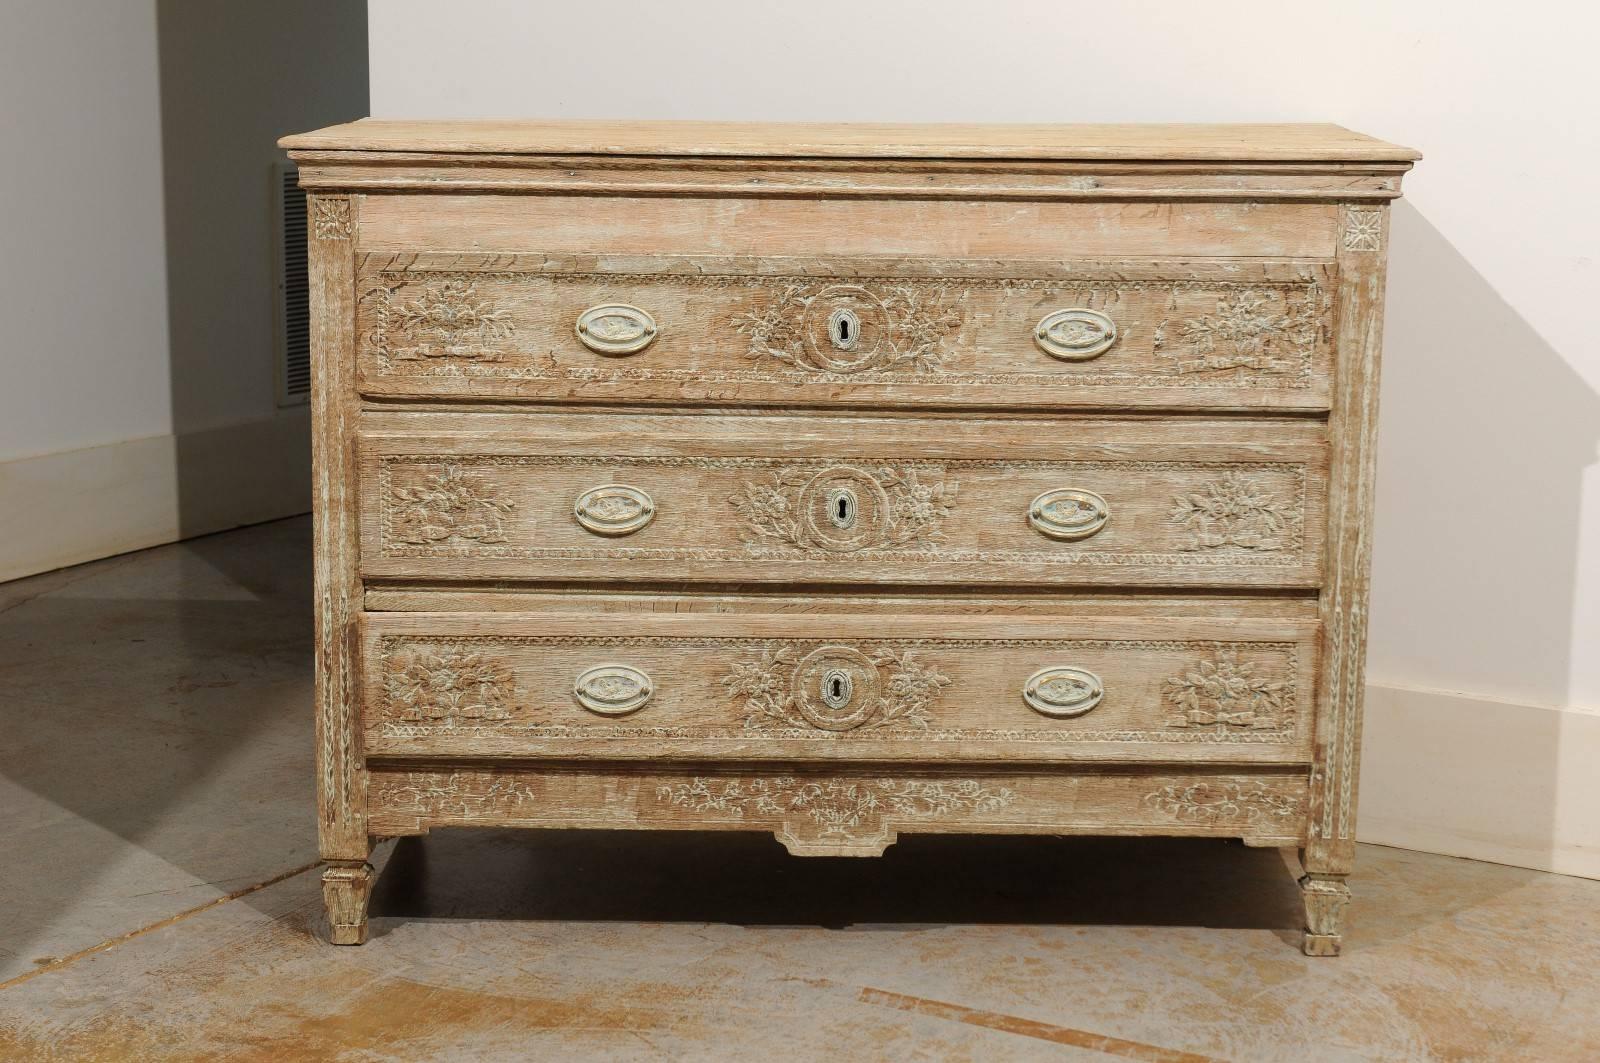 This exquisite French Louis XVI period bleached oak commode from the late 18th century features a three-plank rectangular top over three beautifully carved drawers. Each drawer is adorned with delicate floral motifs flanking the central escutcheon